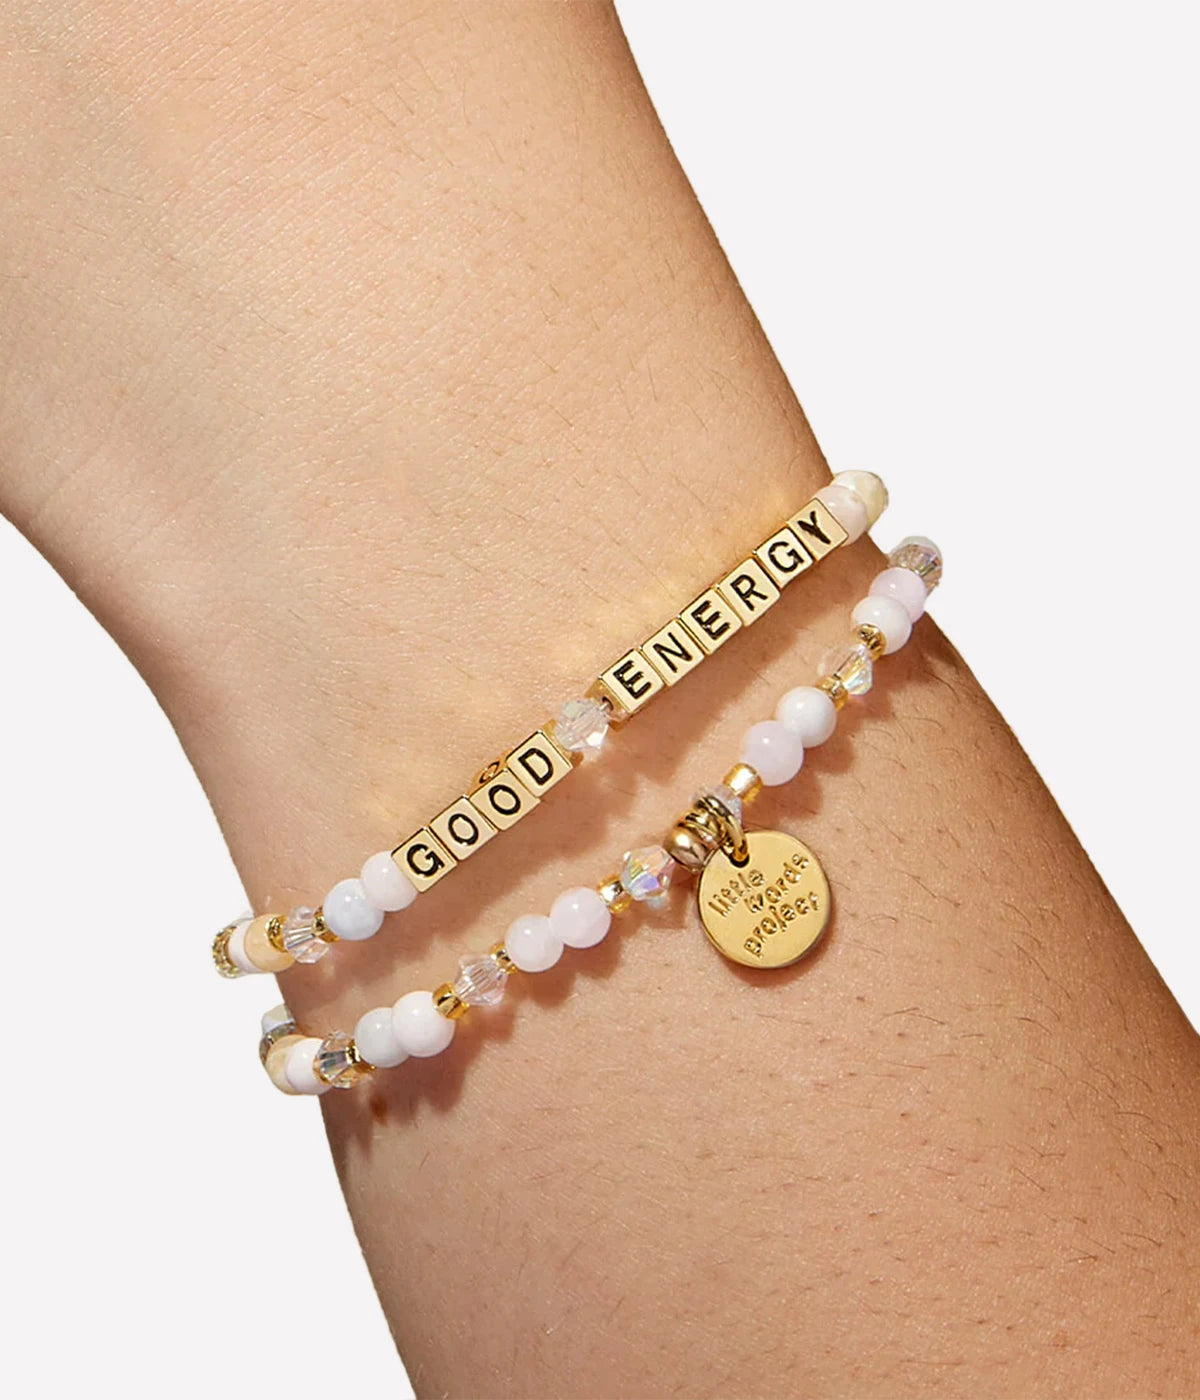 The perfect addition to your bracelet stack, wear this Little Words Project item all summer long. Perfect for Christmas gifts for the women and best friends in your life. Friendship bracelet, beaded jewellery.